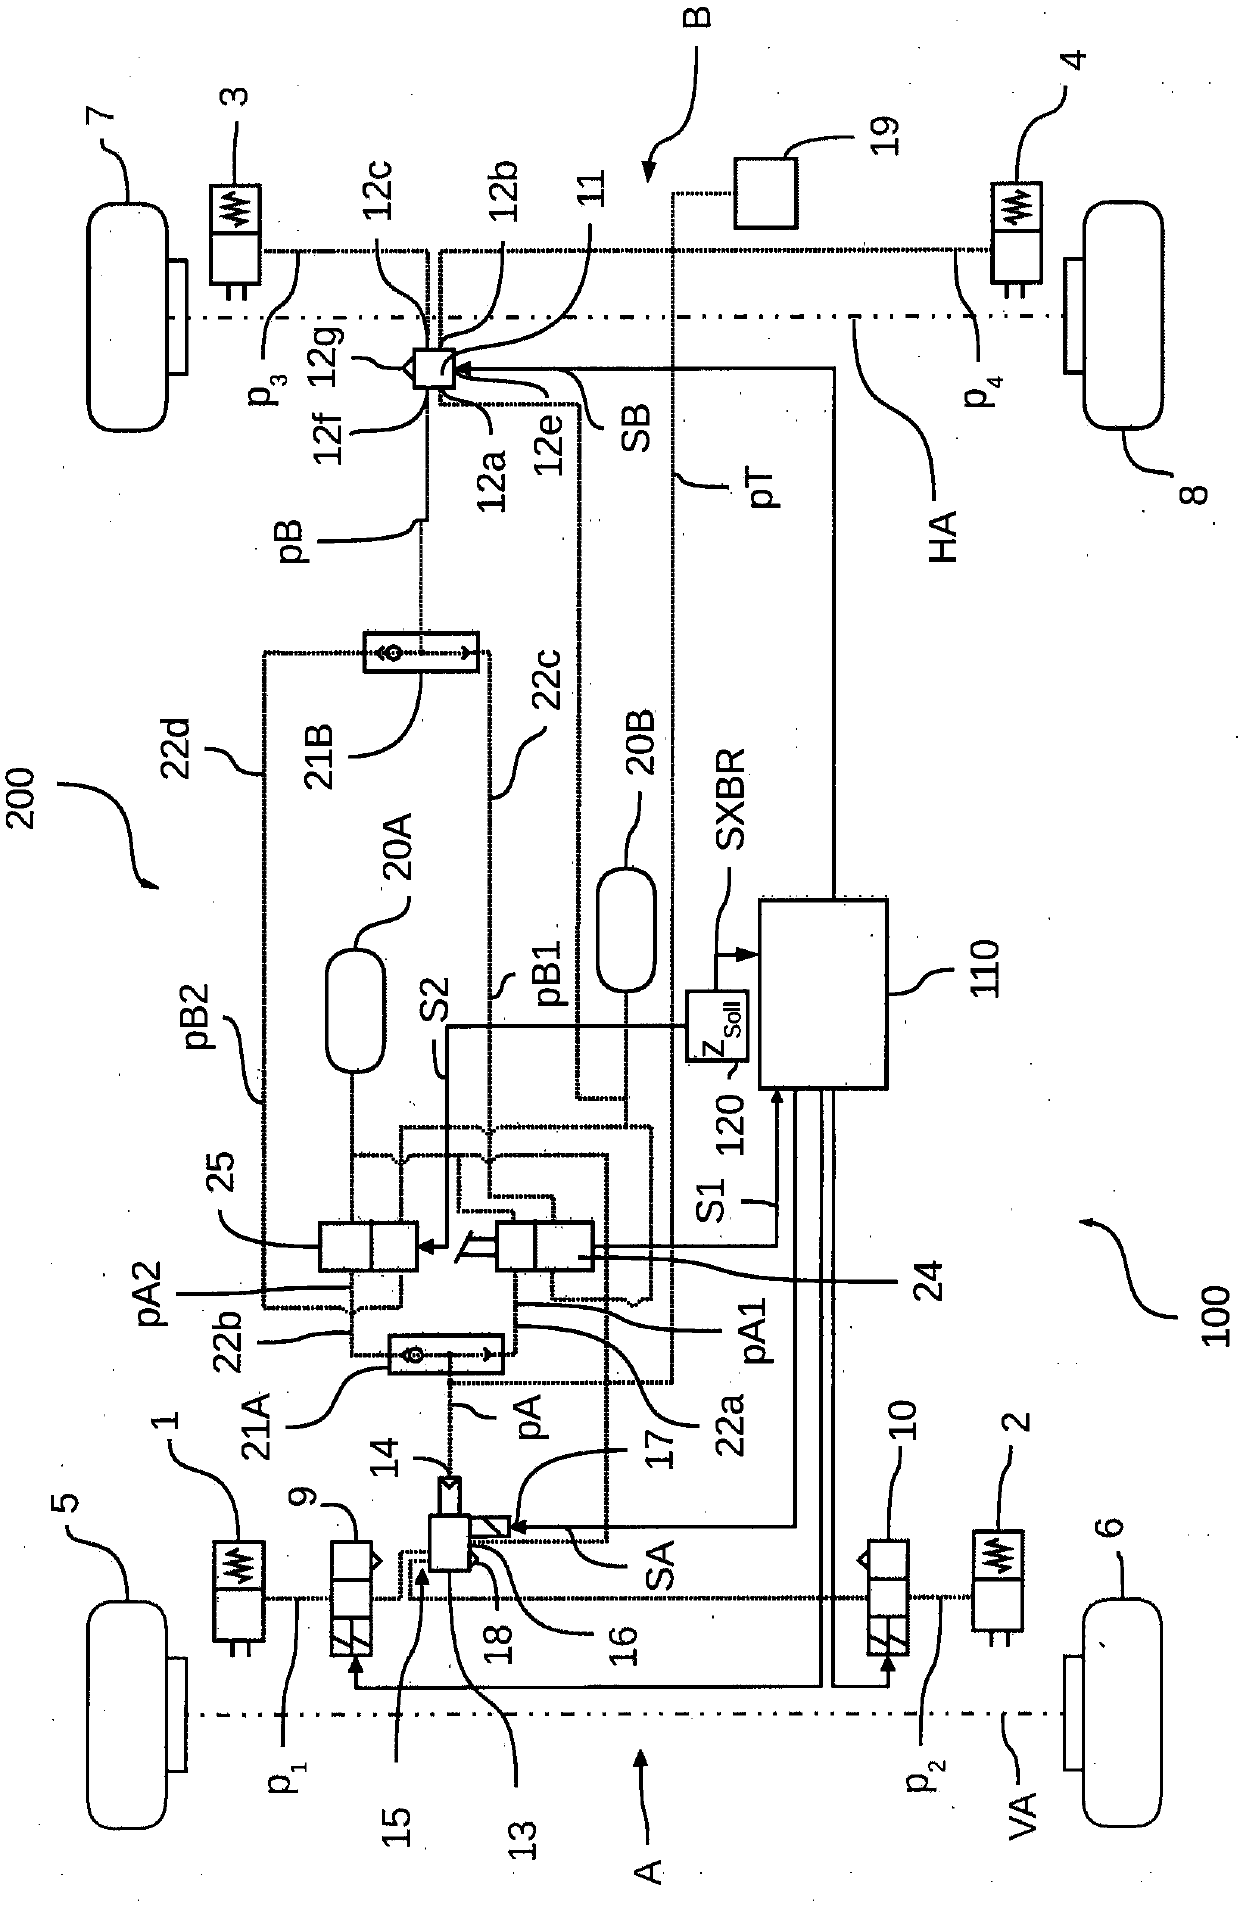 Electronically controlled pneumatic braking system in a commercial vehicle, and method for electronically controlling a pneumatic braking system